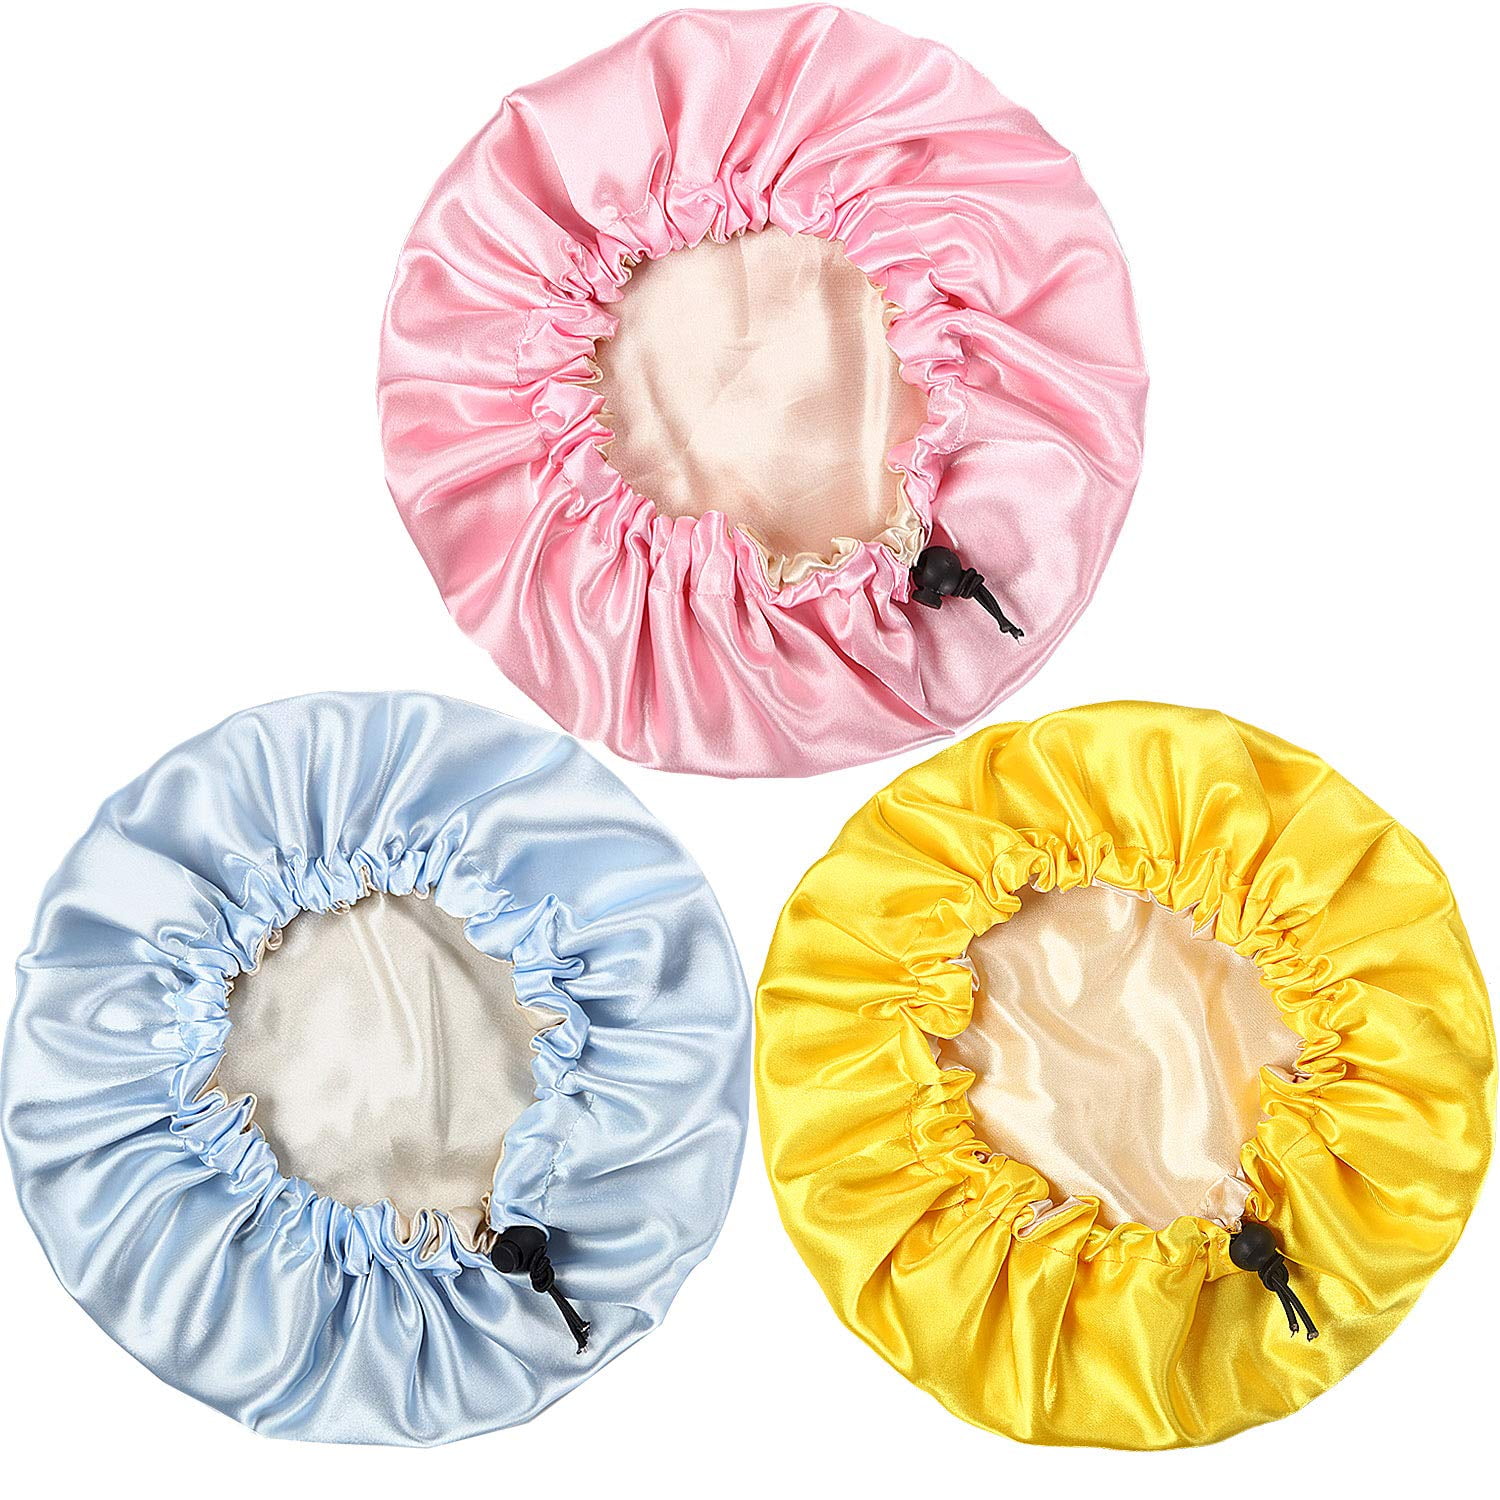 6-18months pack of two Baby Satin Bonnet Cap 